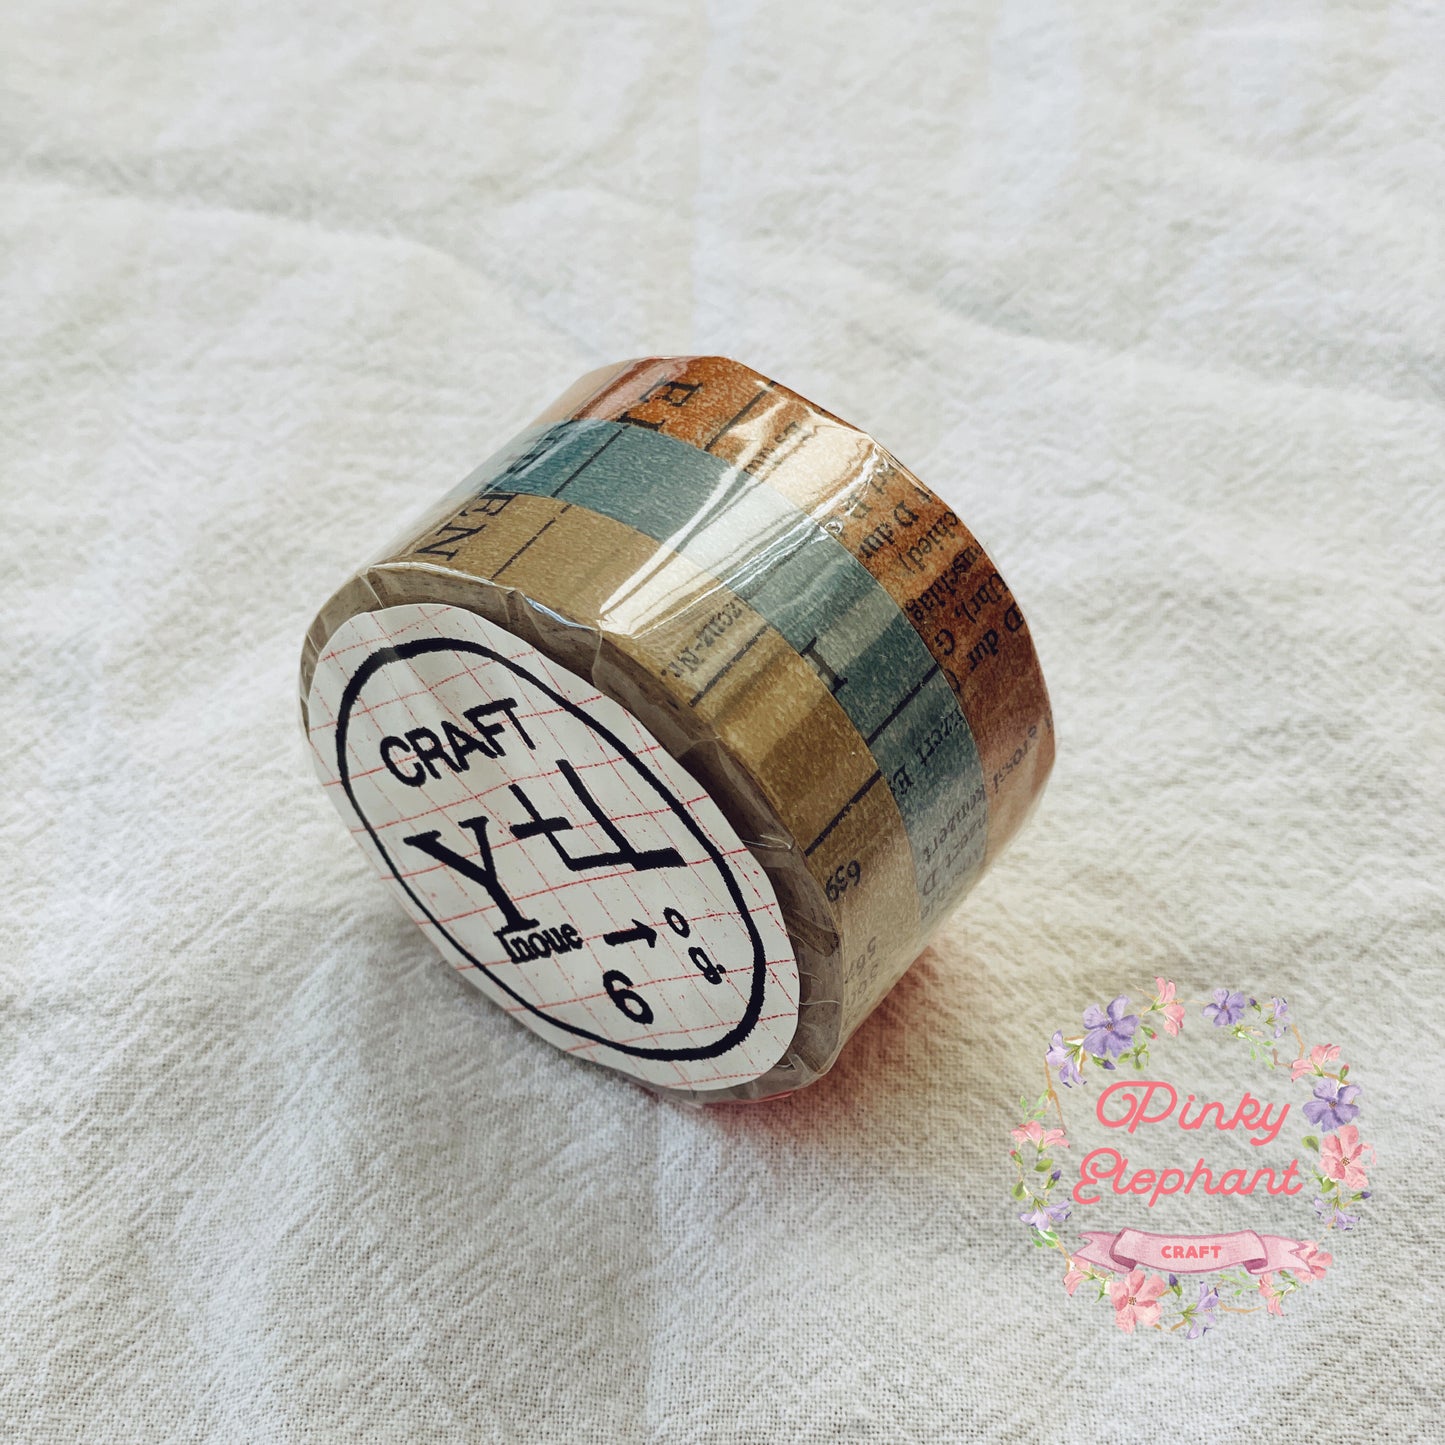 Classiky x Yoko Inoue Vintage-style Old Book Collage Washi Tape Set- 3pc/set, 10mm or 15mm